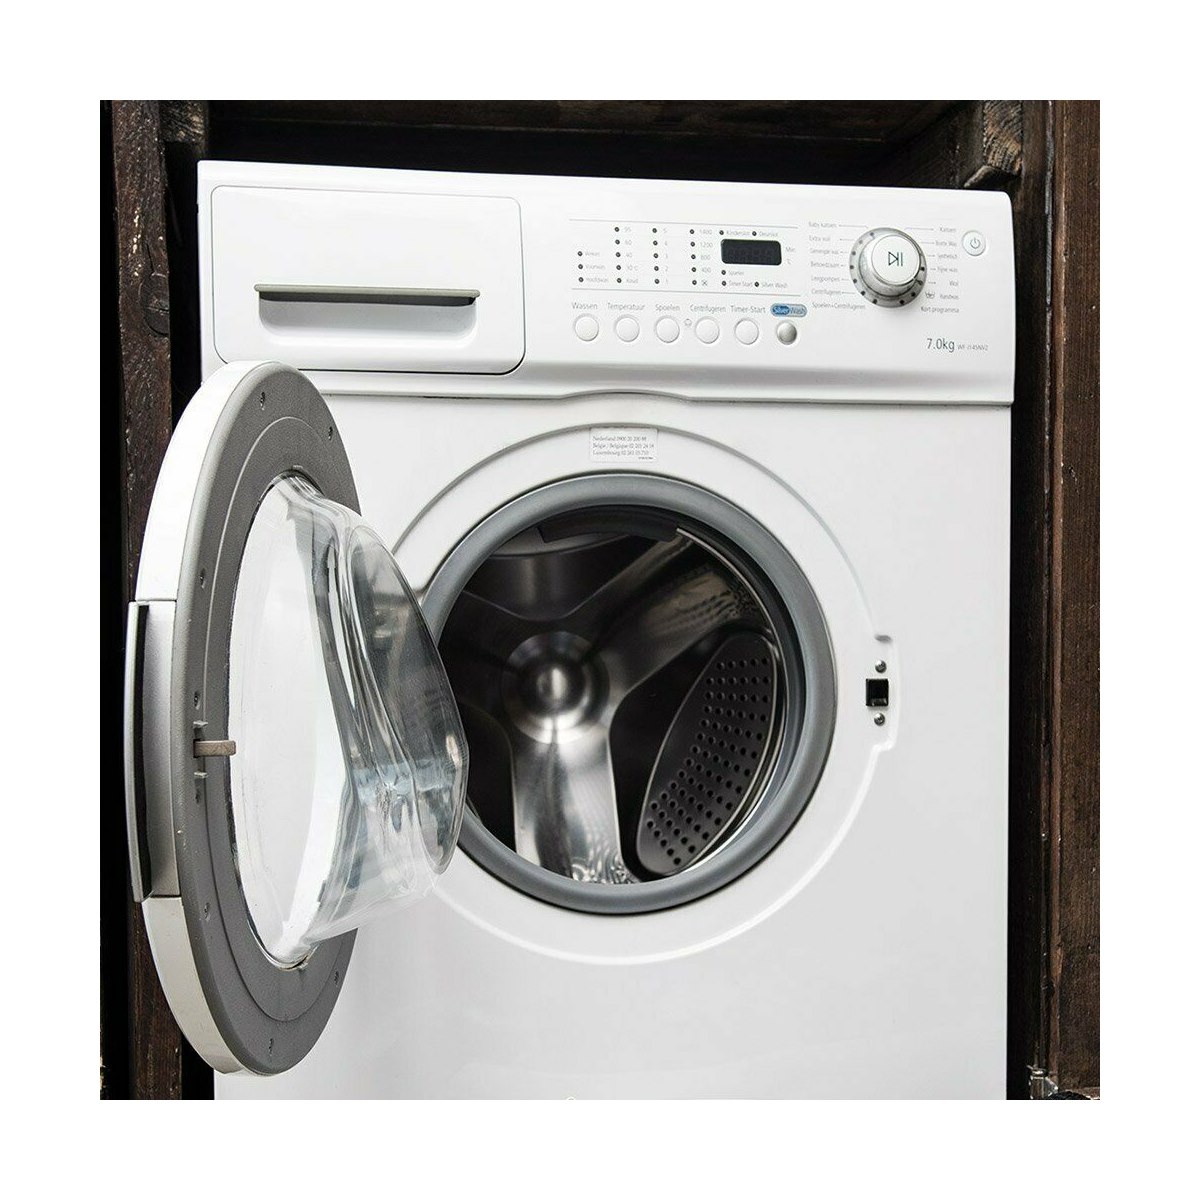 How to Clean and Maintain your Washing Machine